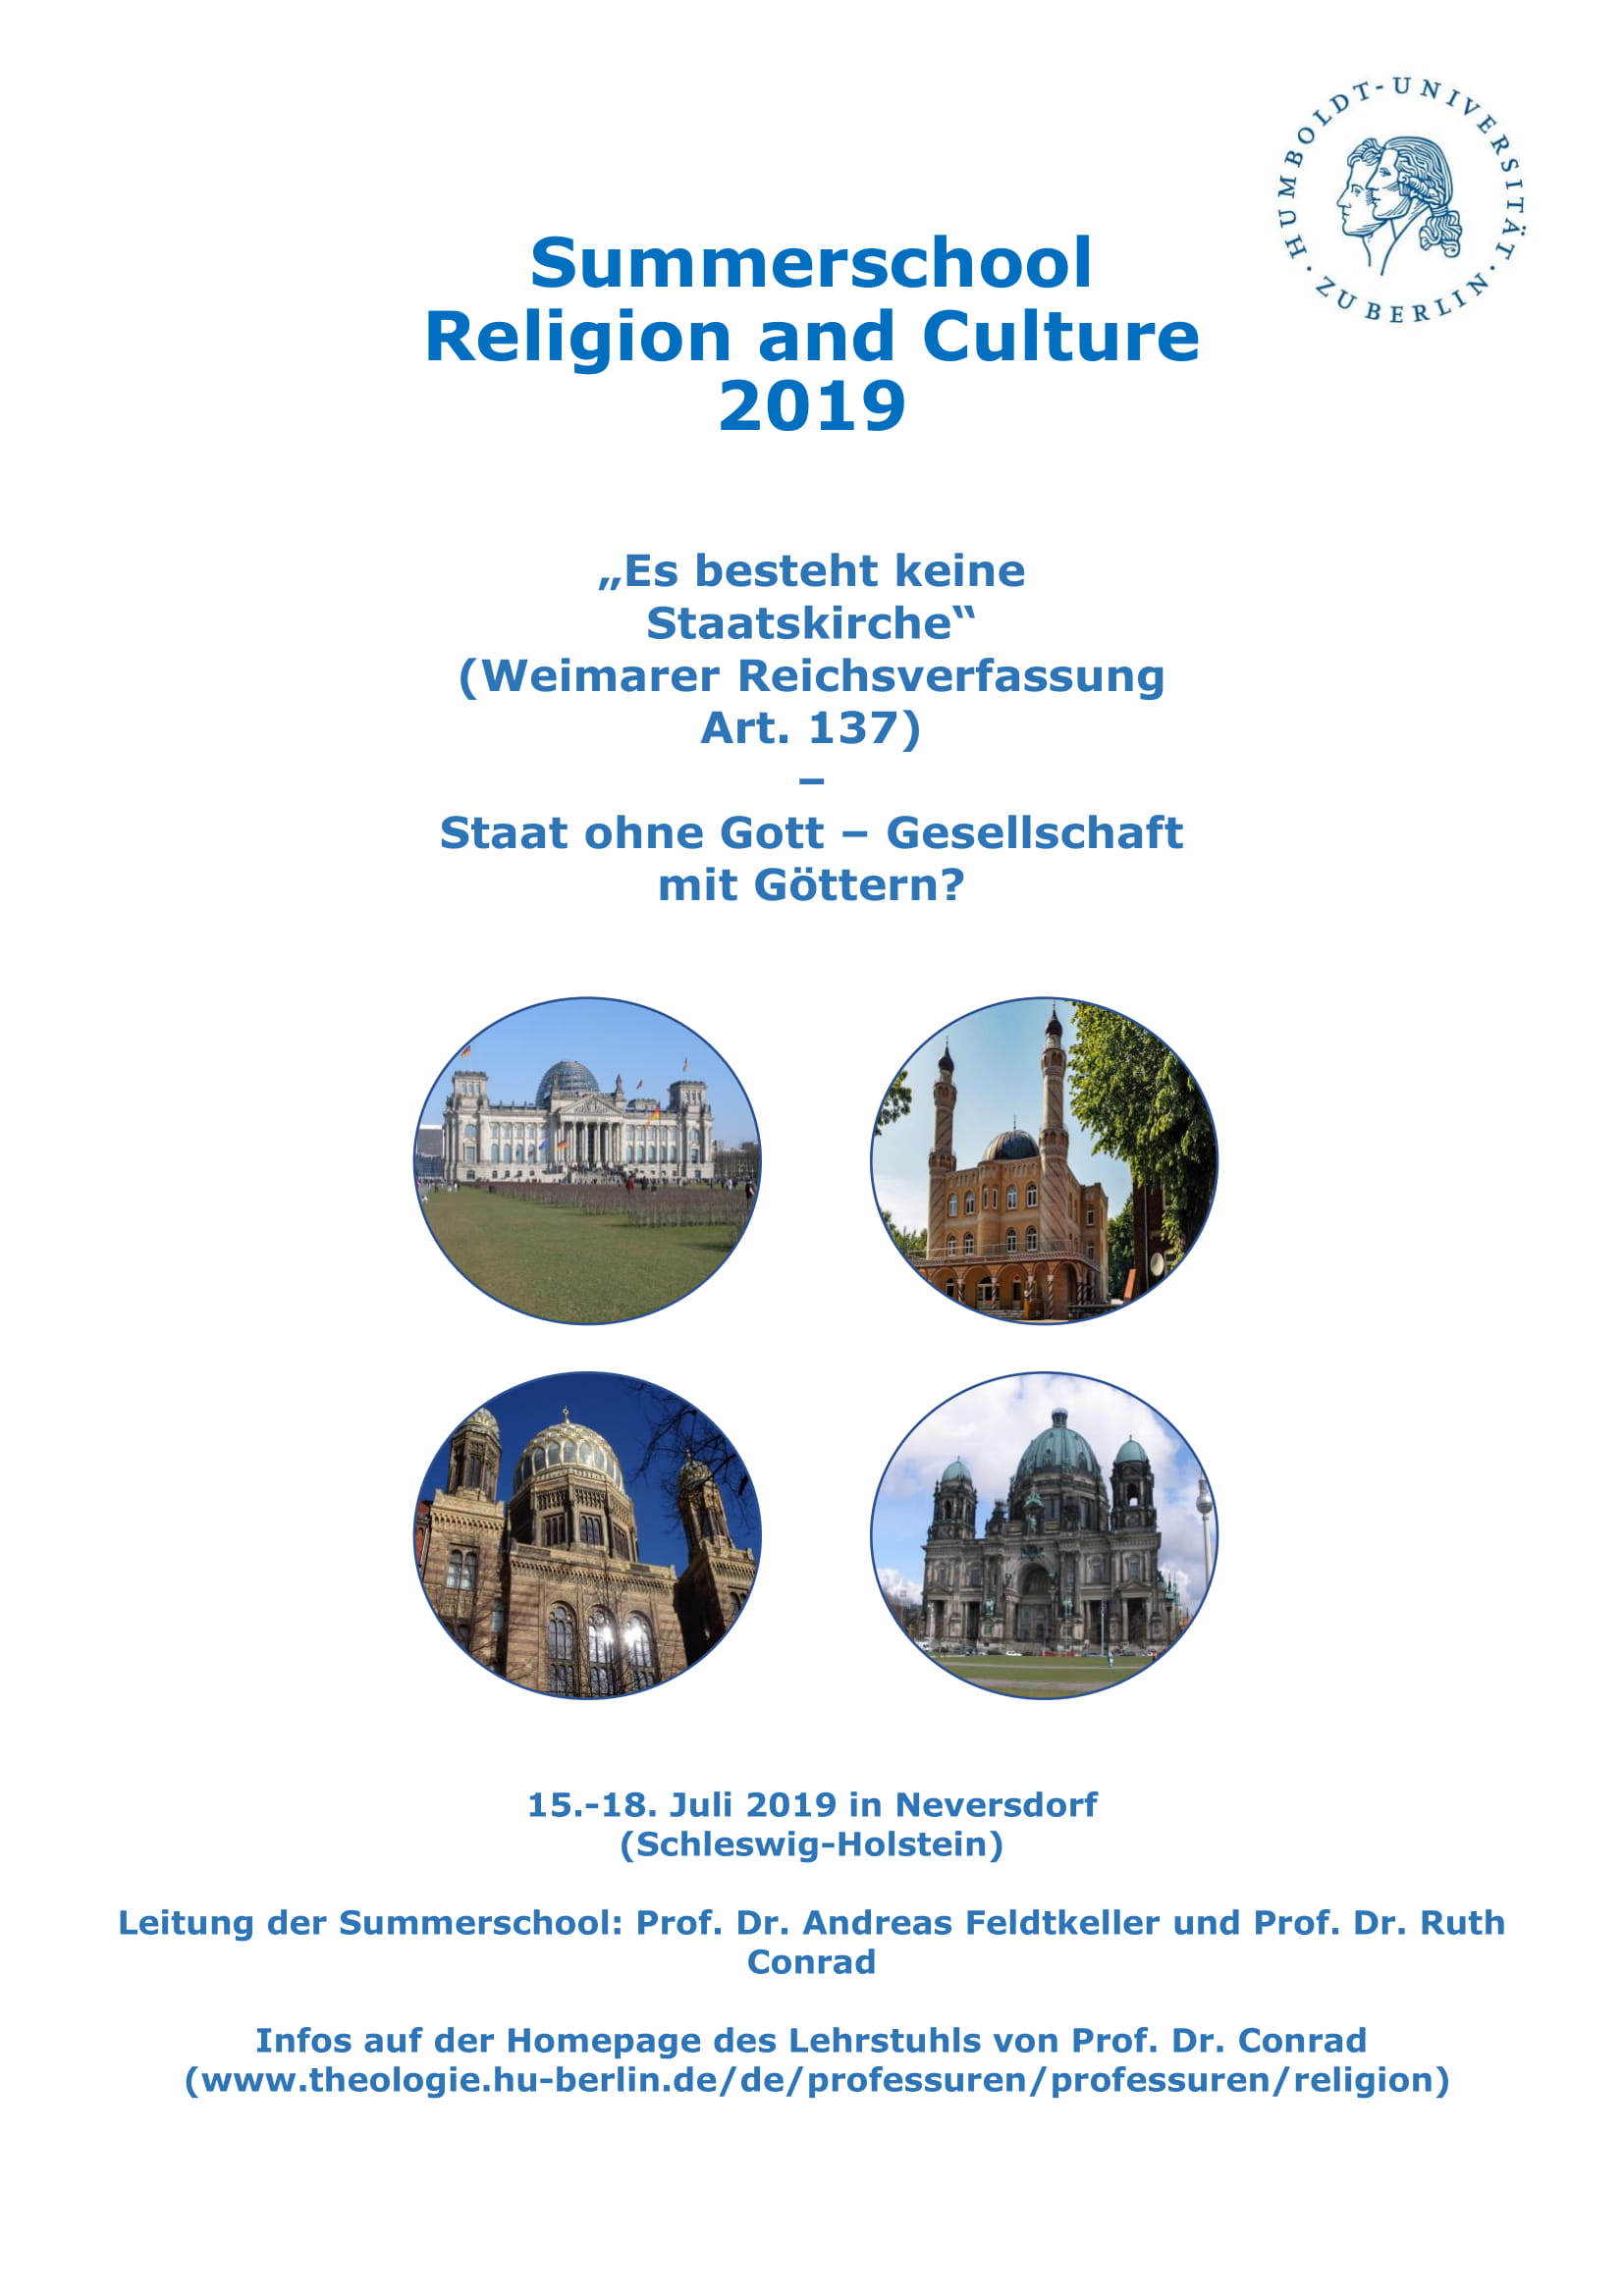 Summerschool Religion and Culture 2019